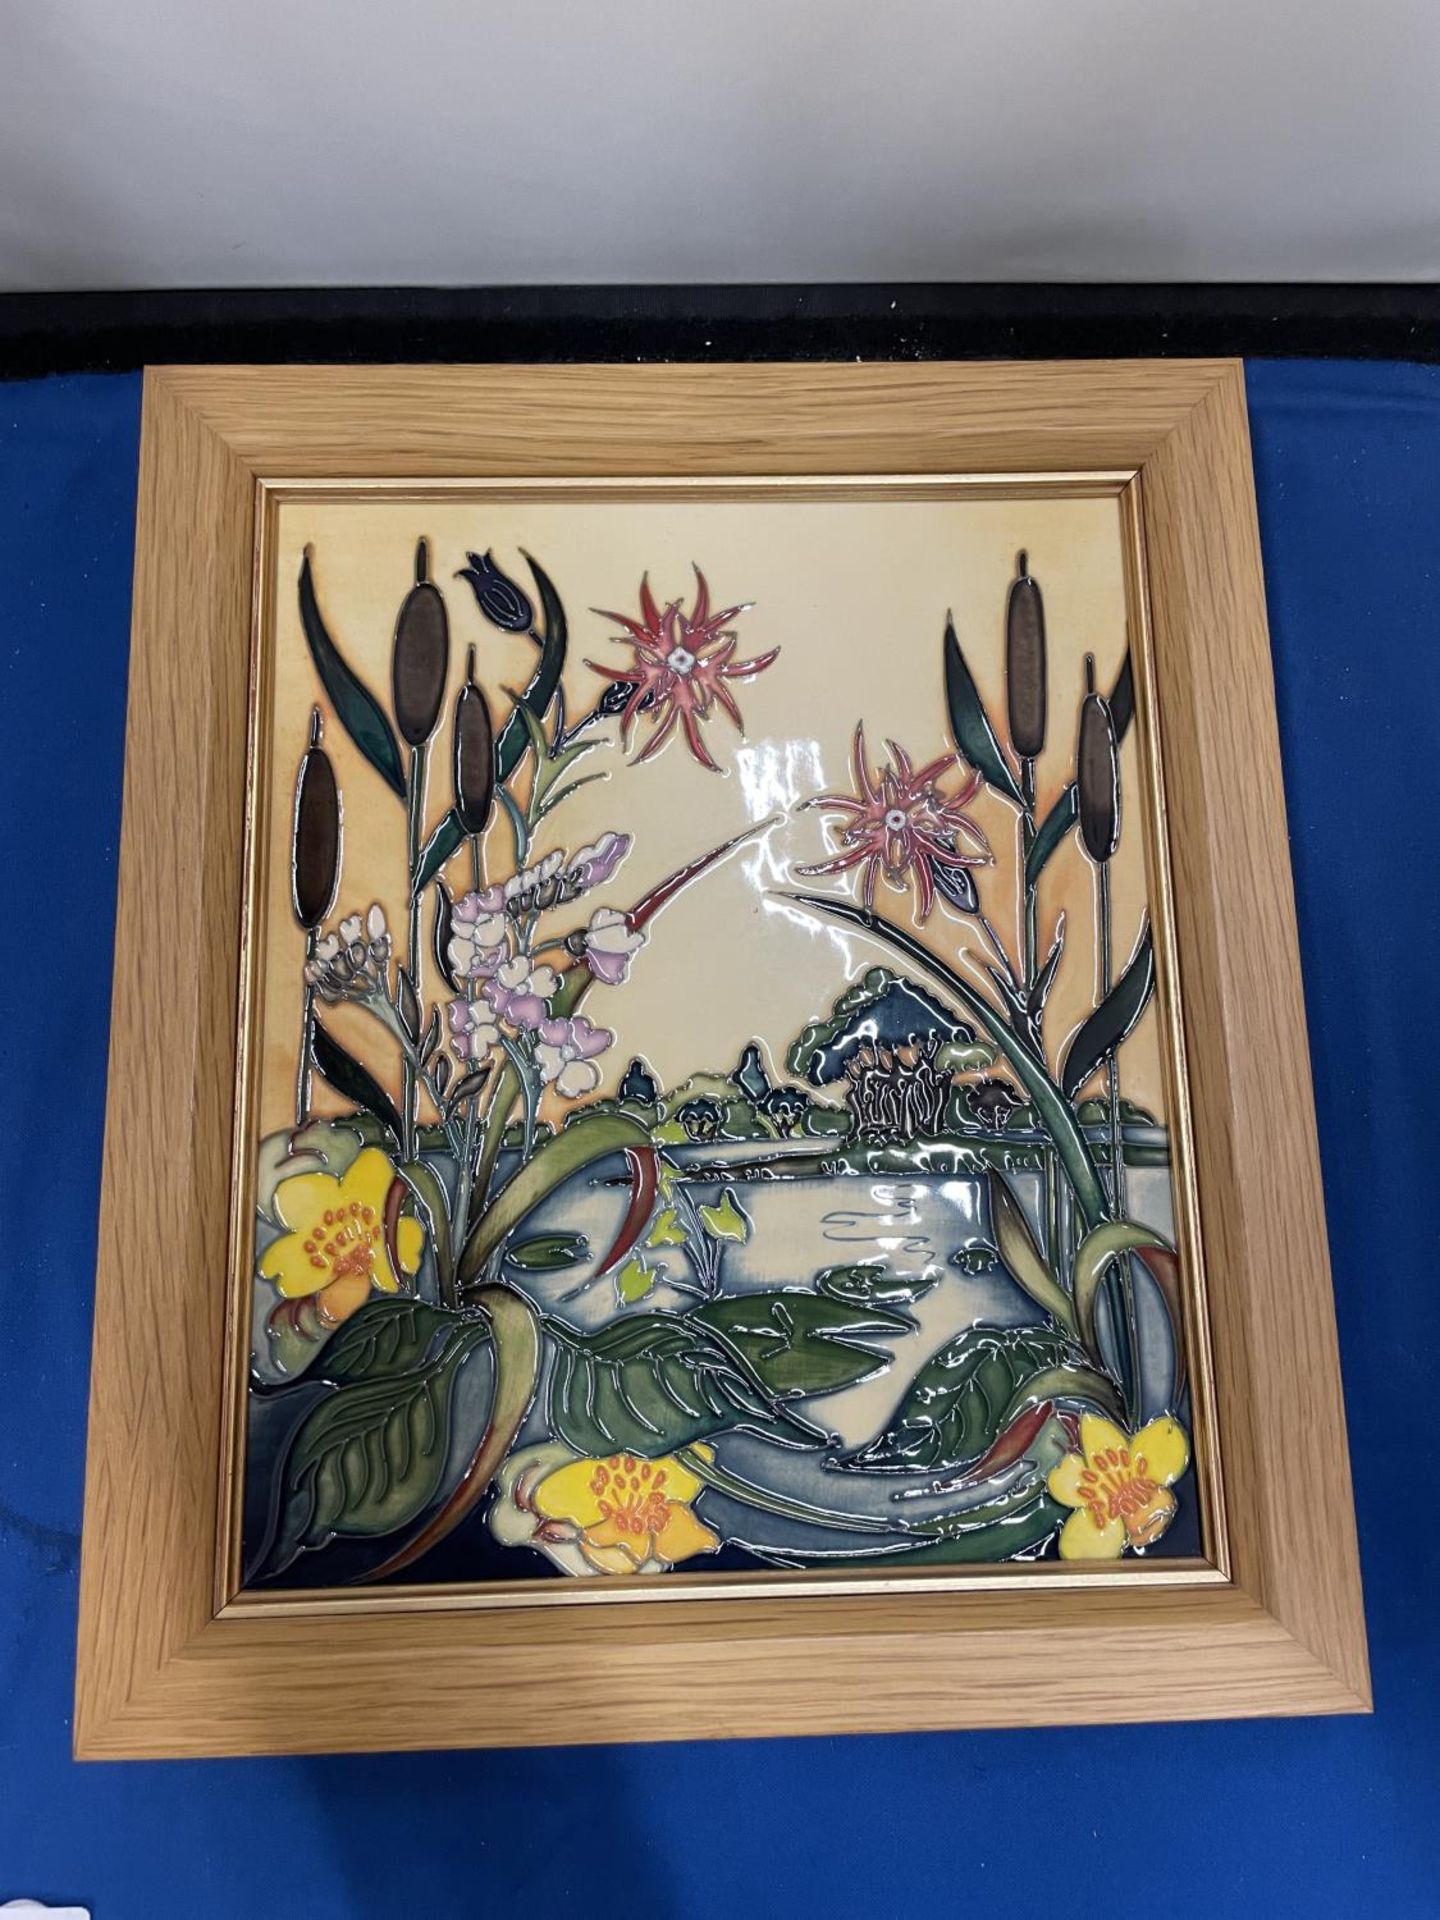 A MOORCROFT FRAMED PLAQUE RUNNYMEAD (NICOLA STANLEY) 2015 - Image 2 of 6